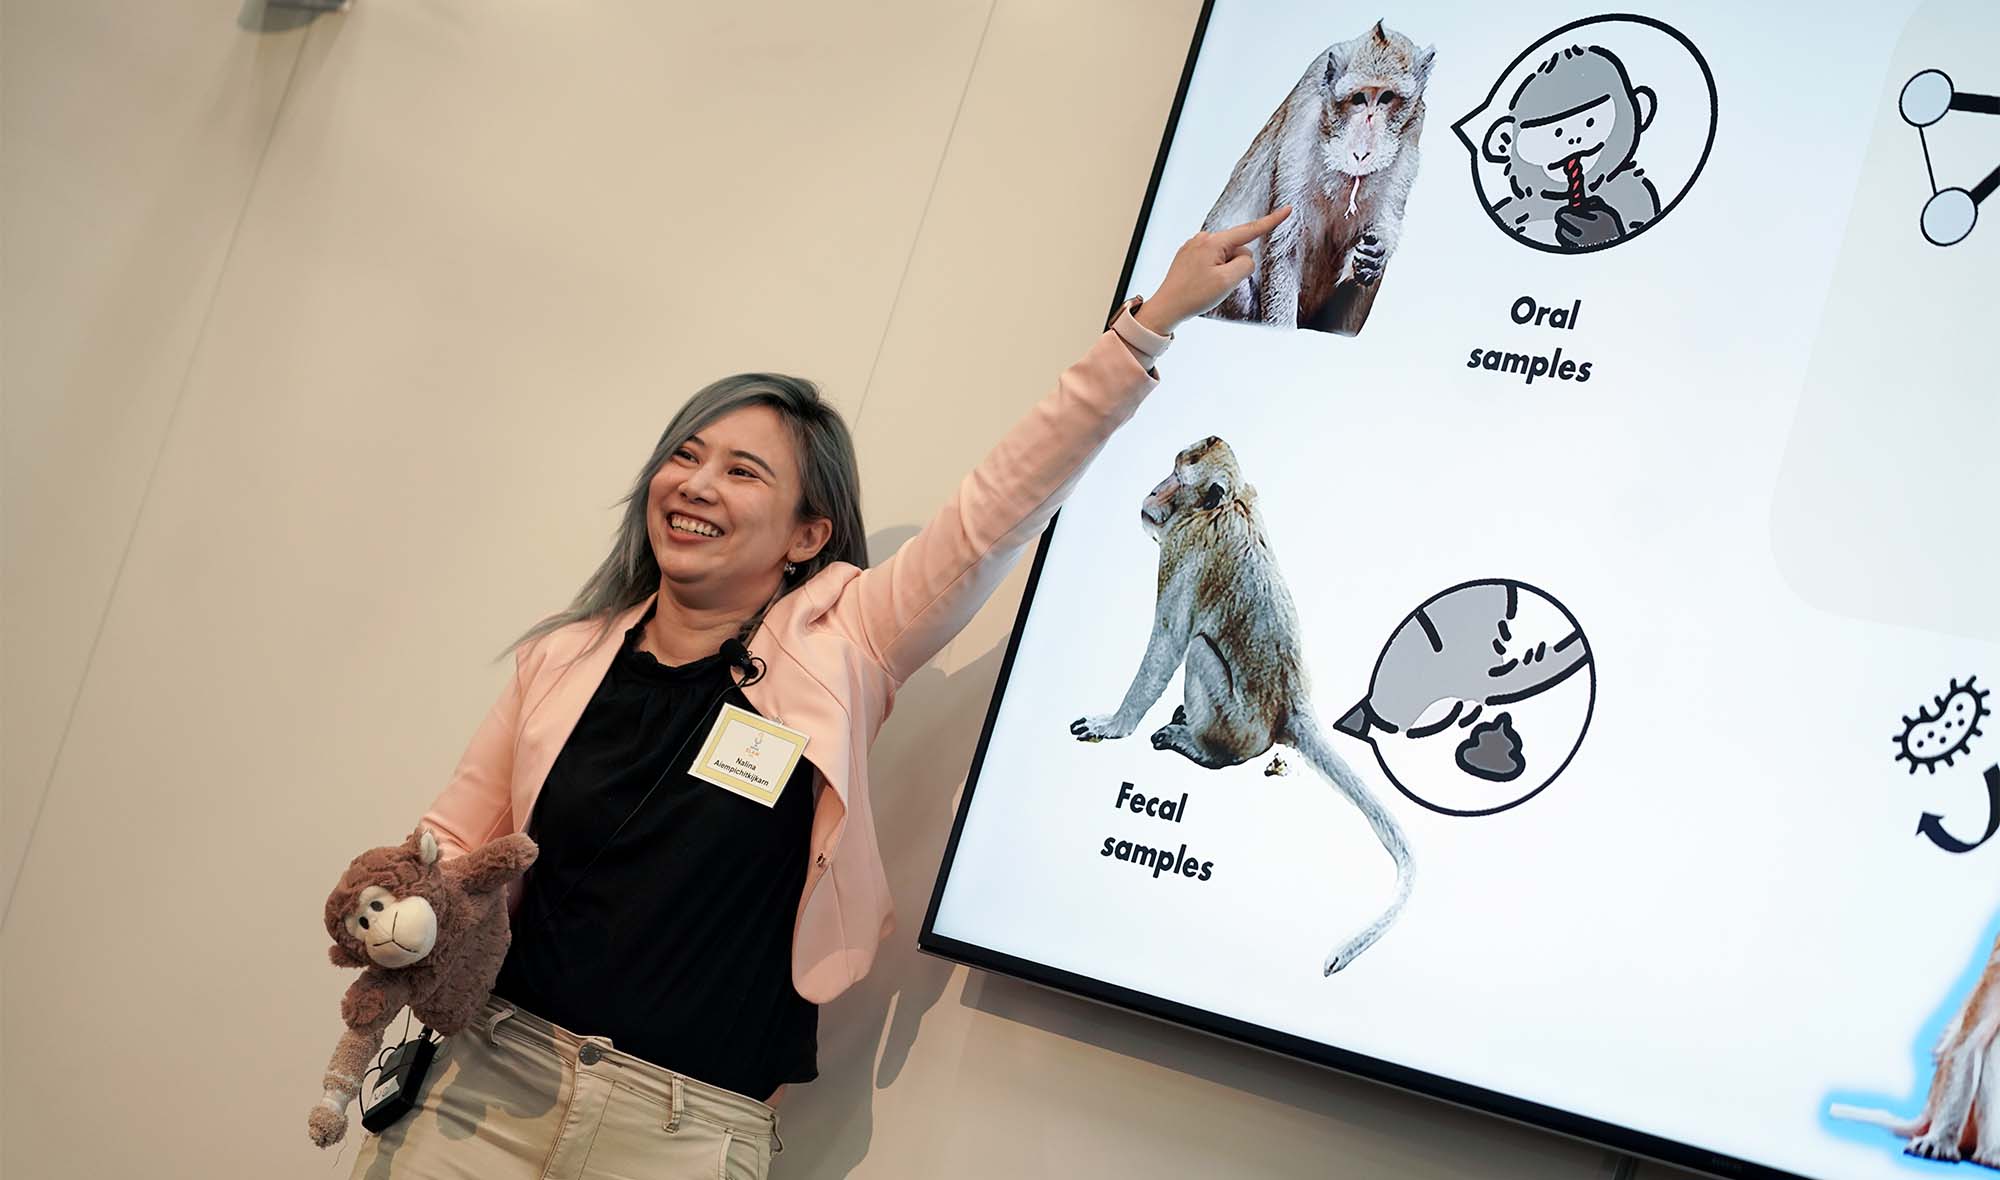 Female presenter standing beside presentation screen and pointing to an image of a monkey